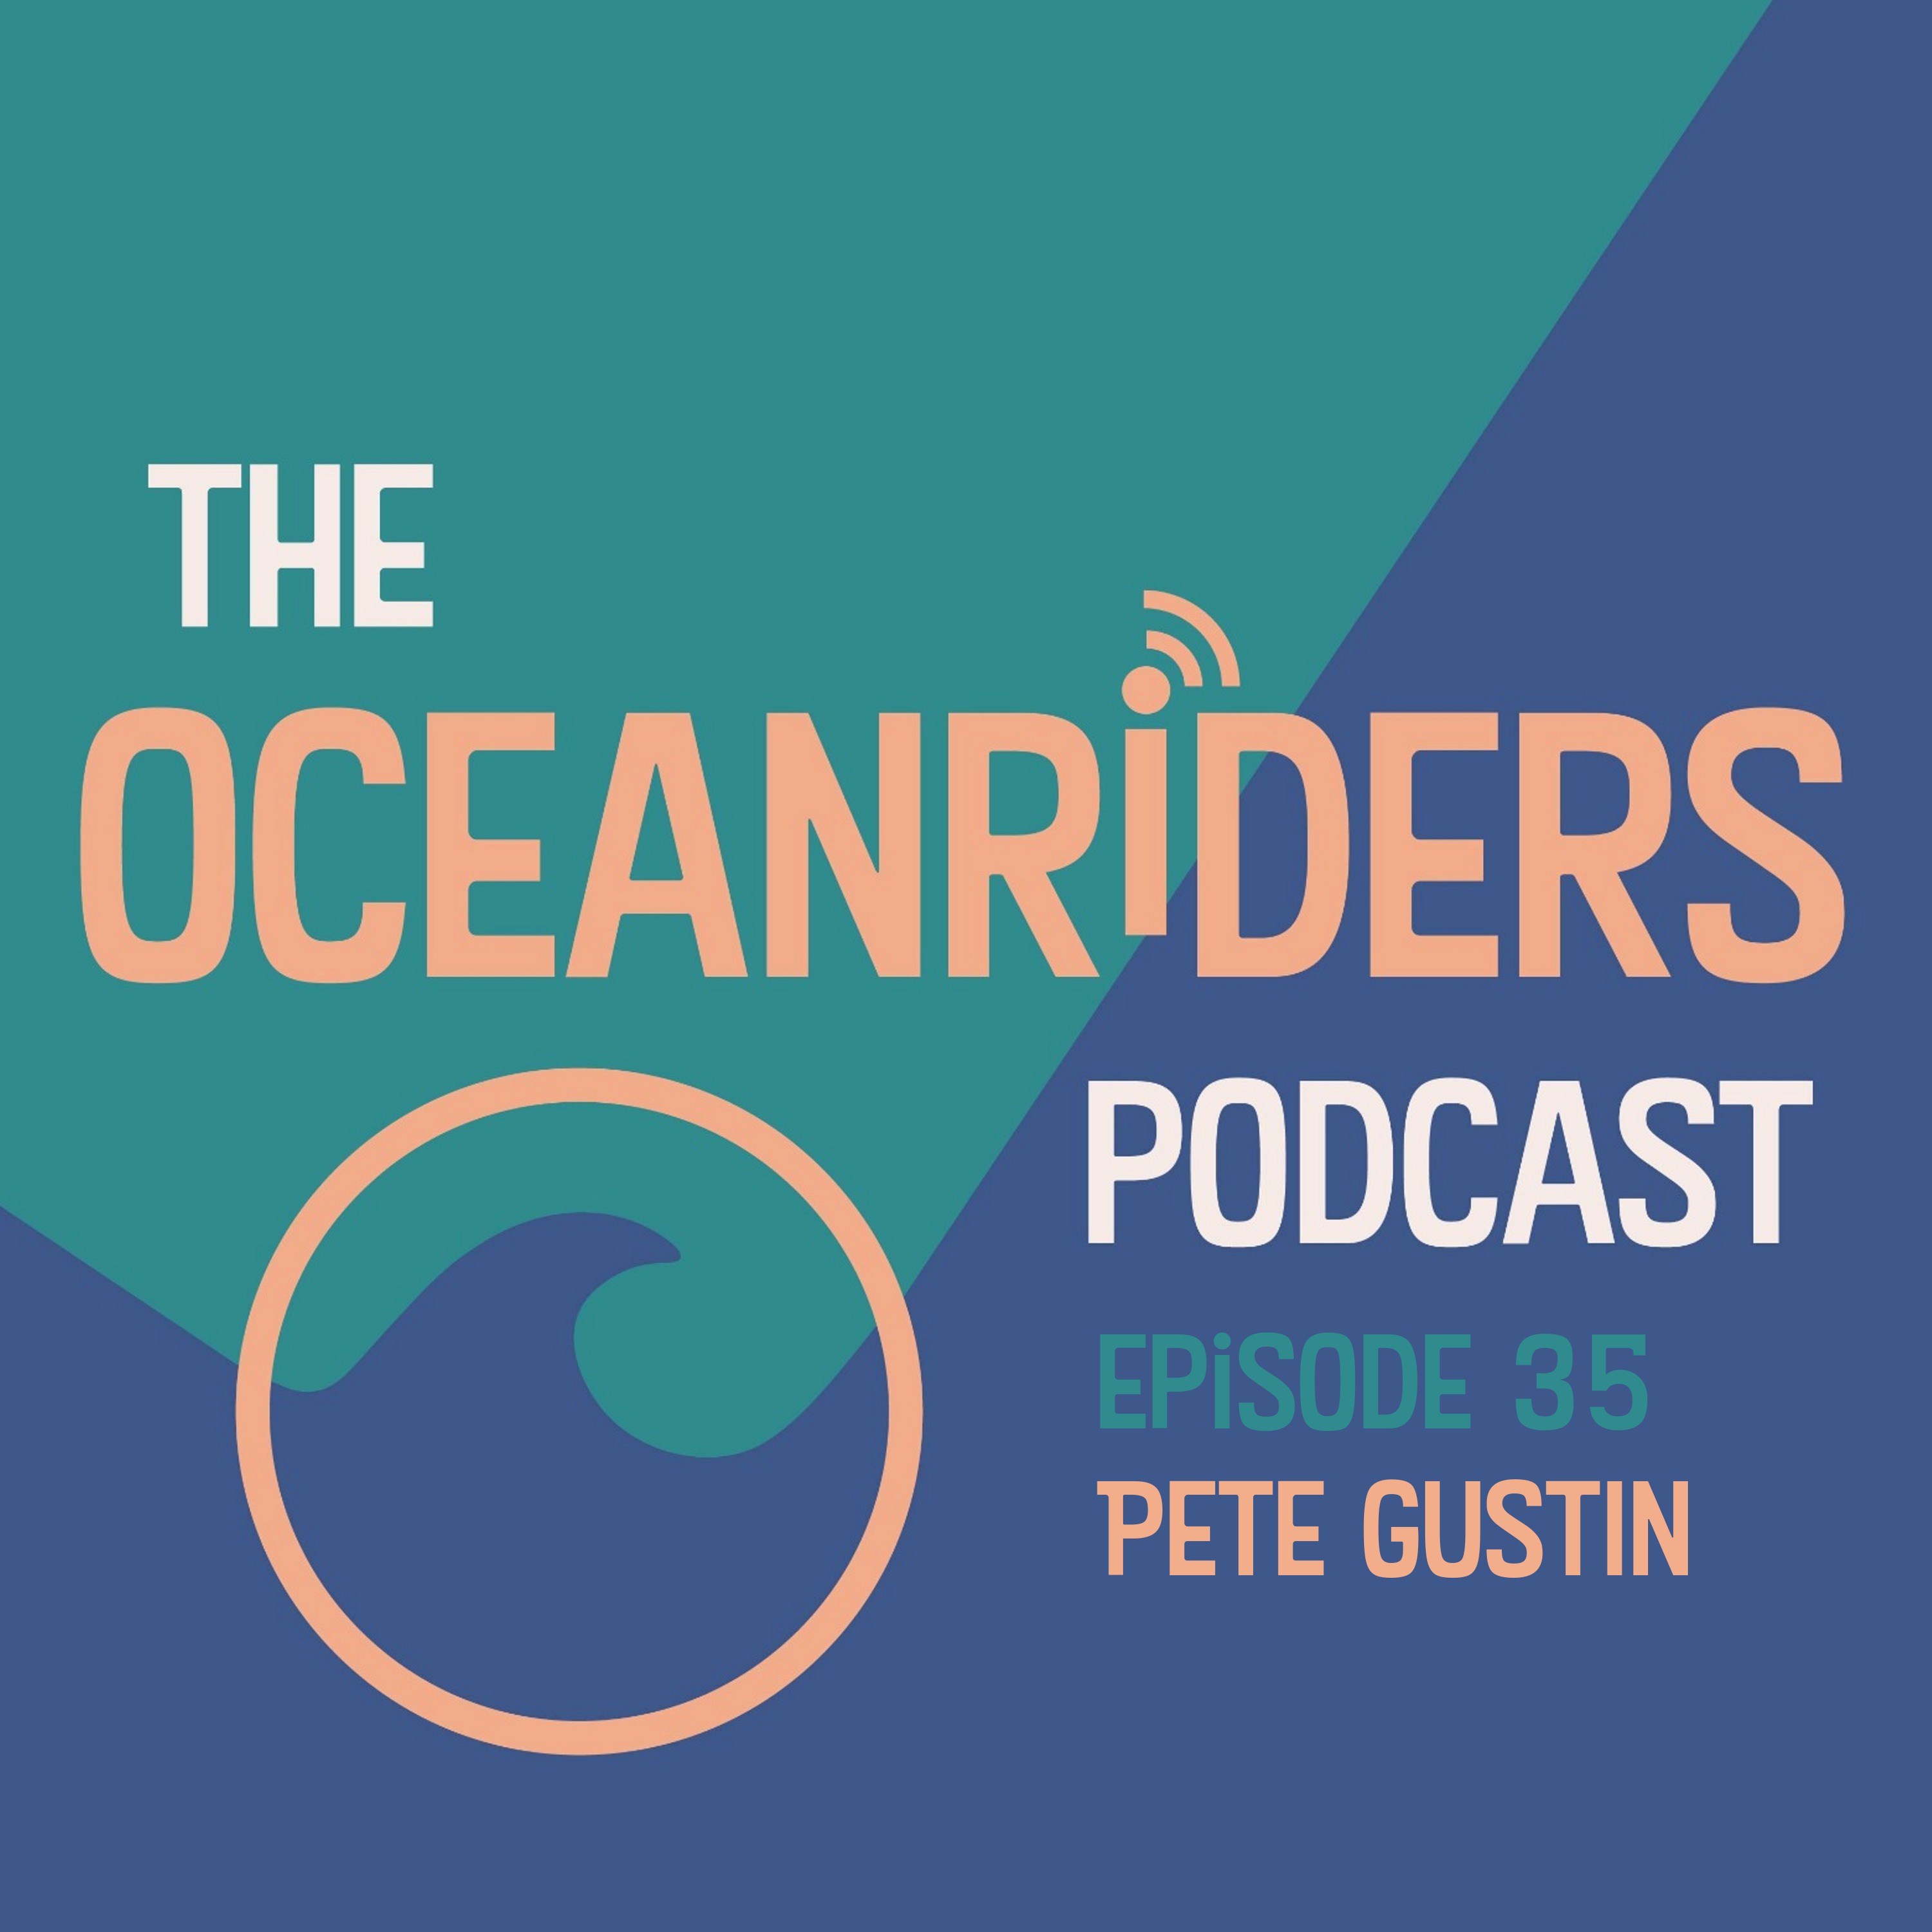 Pete Gustin on the Oceanriders Podcast